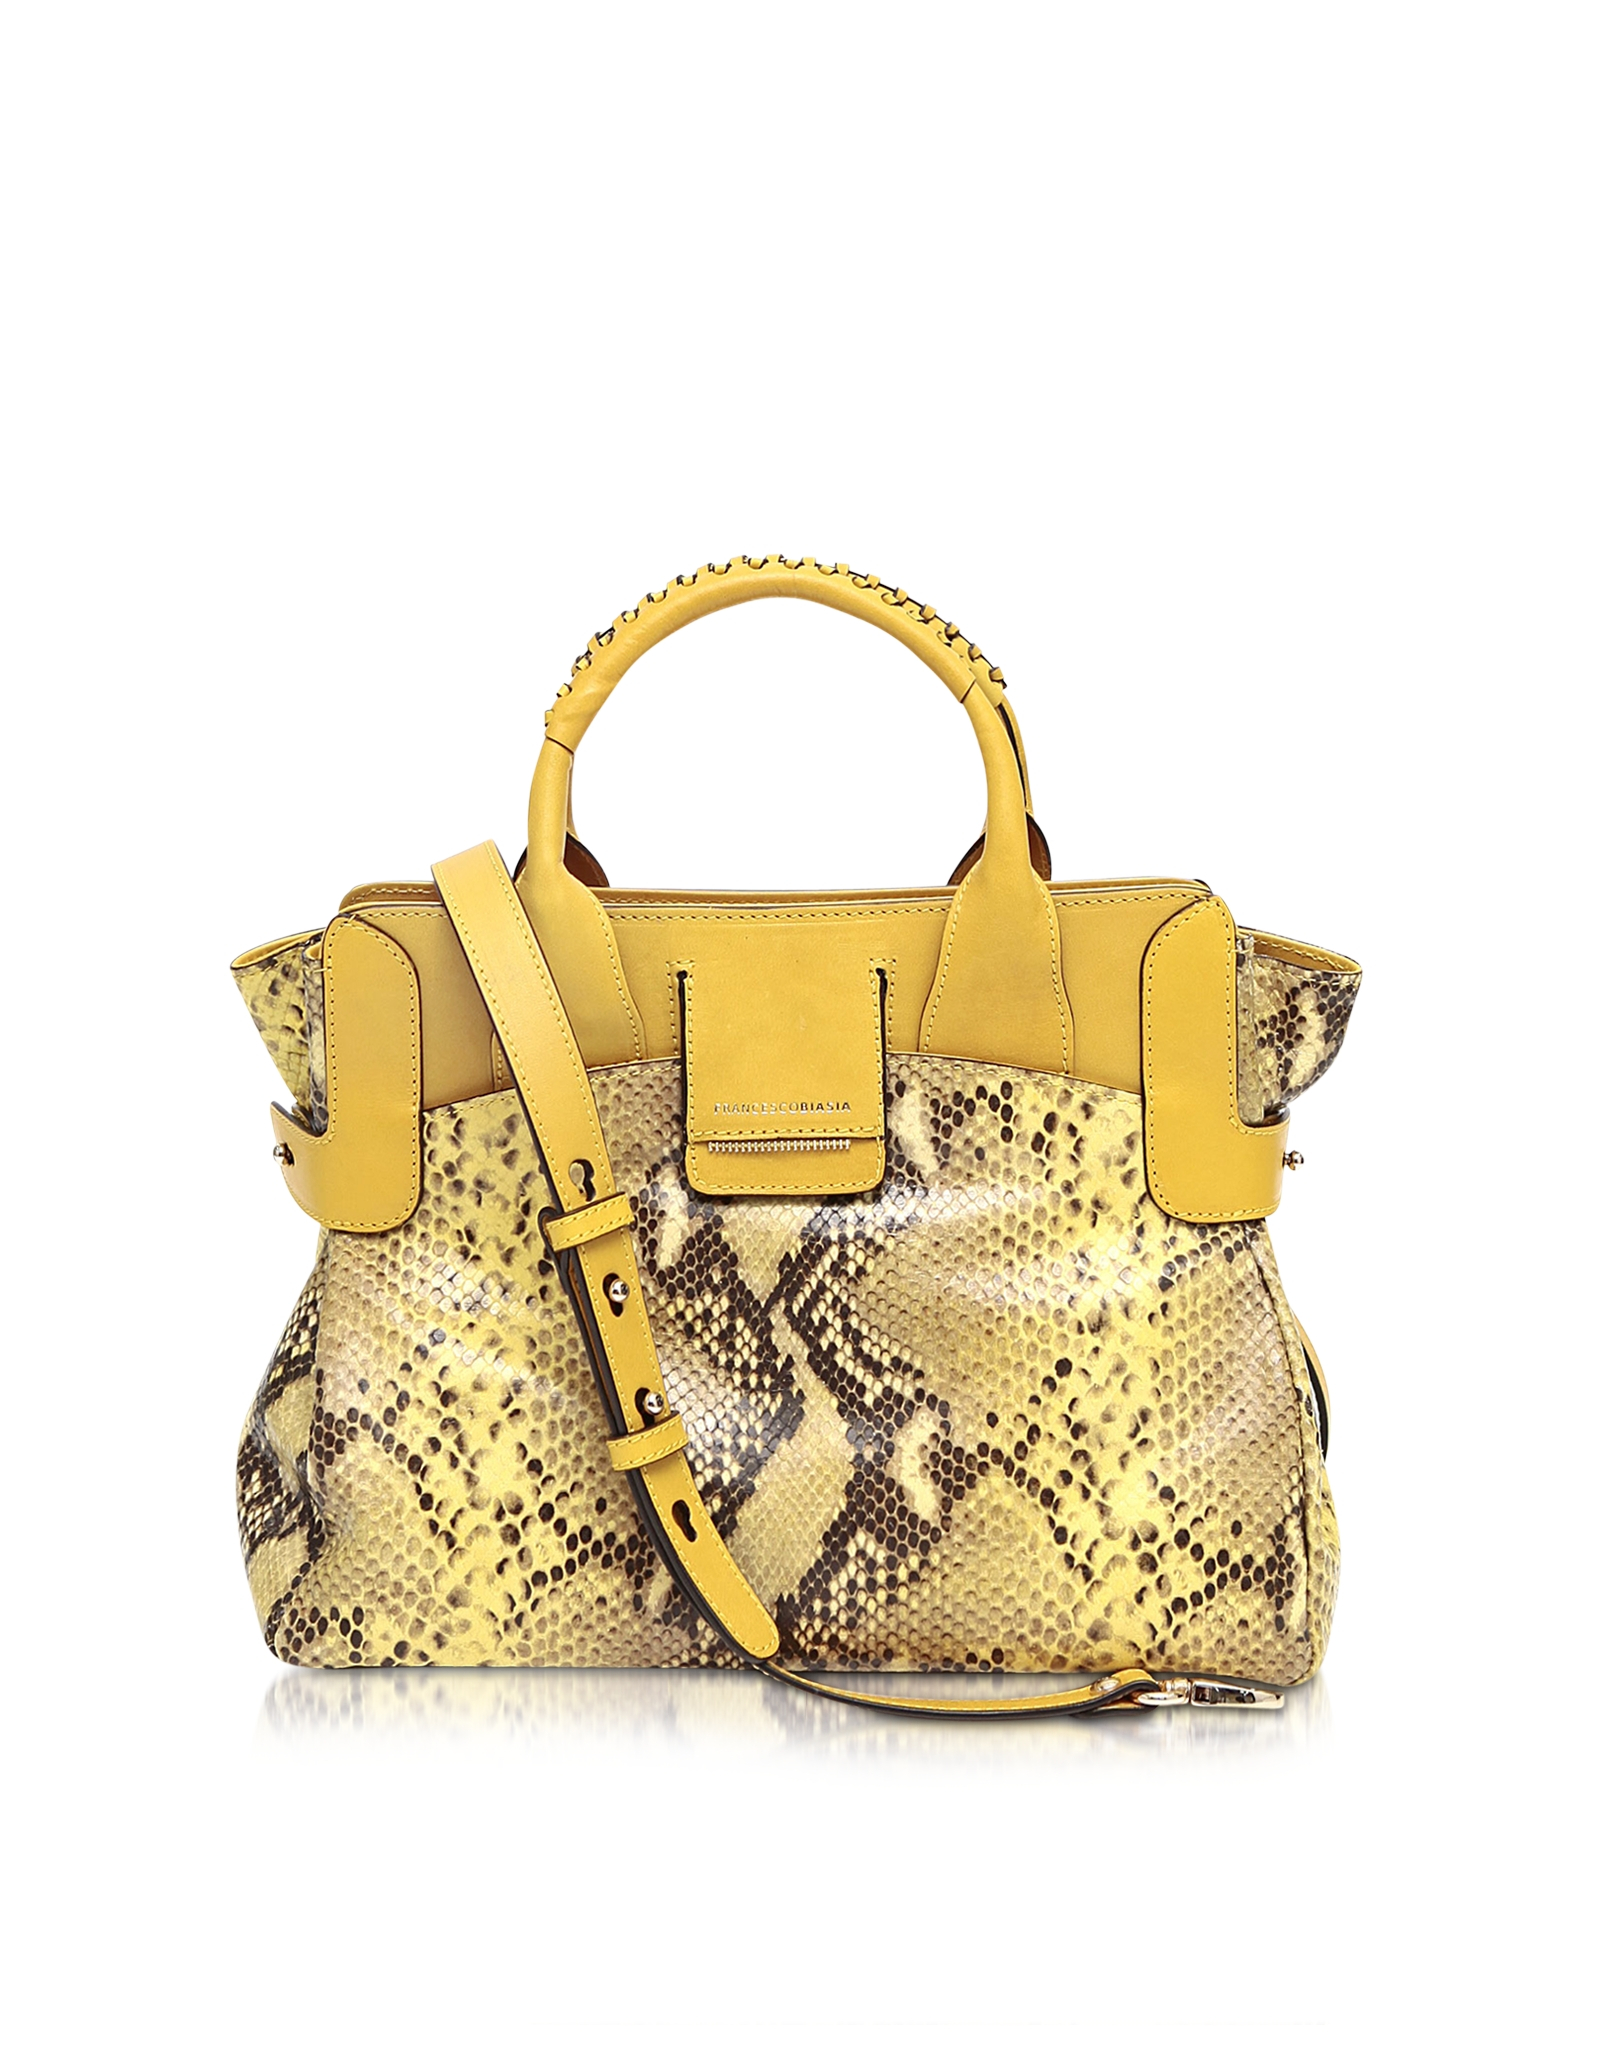 Lyst - Francesco biasia Camden Small Yellow Embossed Leather Tote Bag W/shoulder Strap in Brown